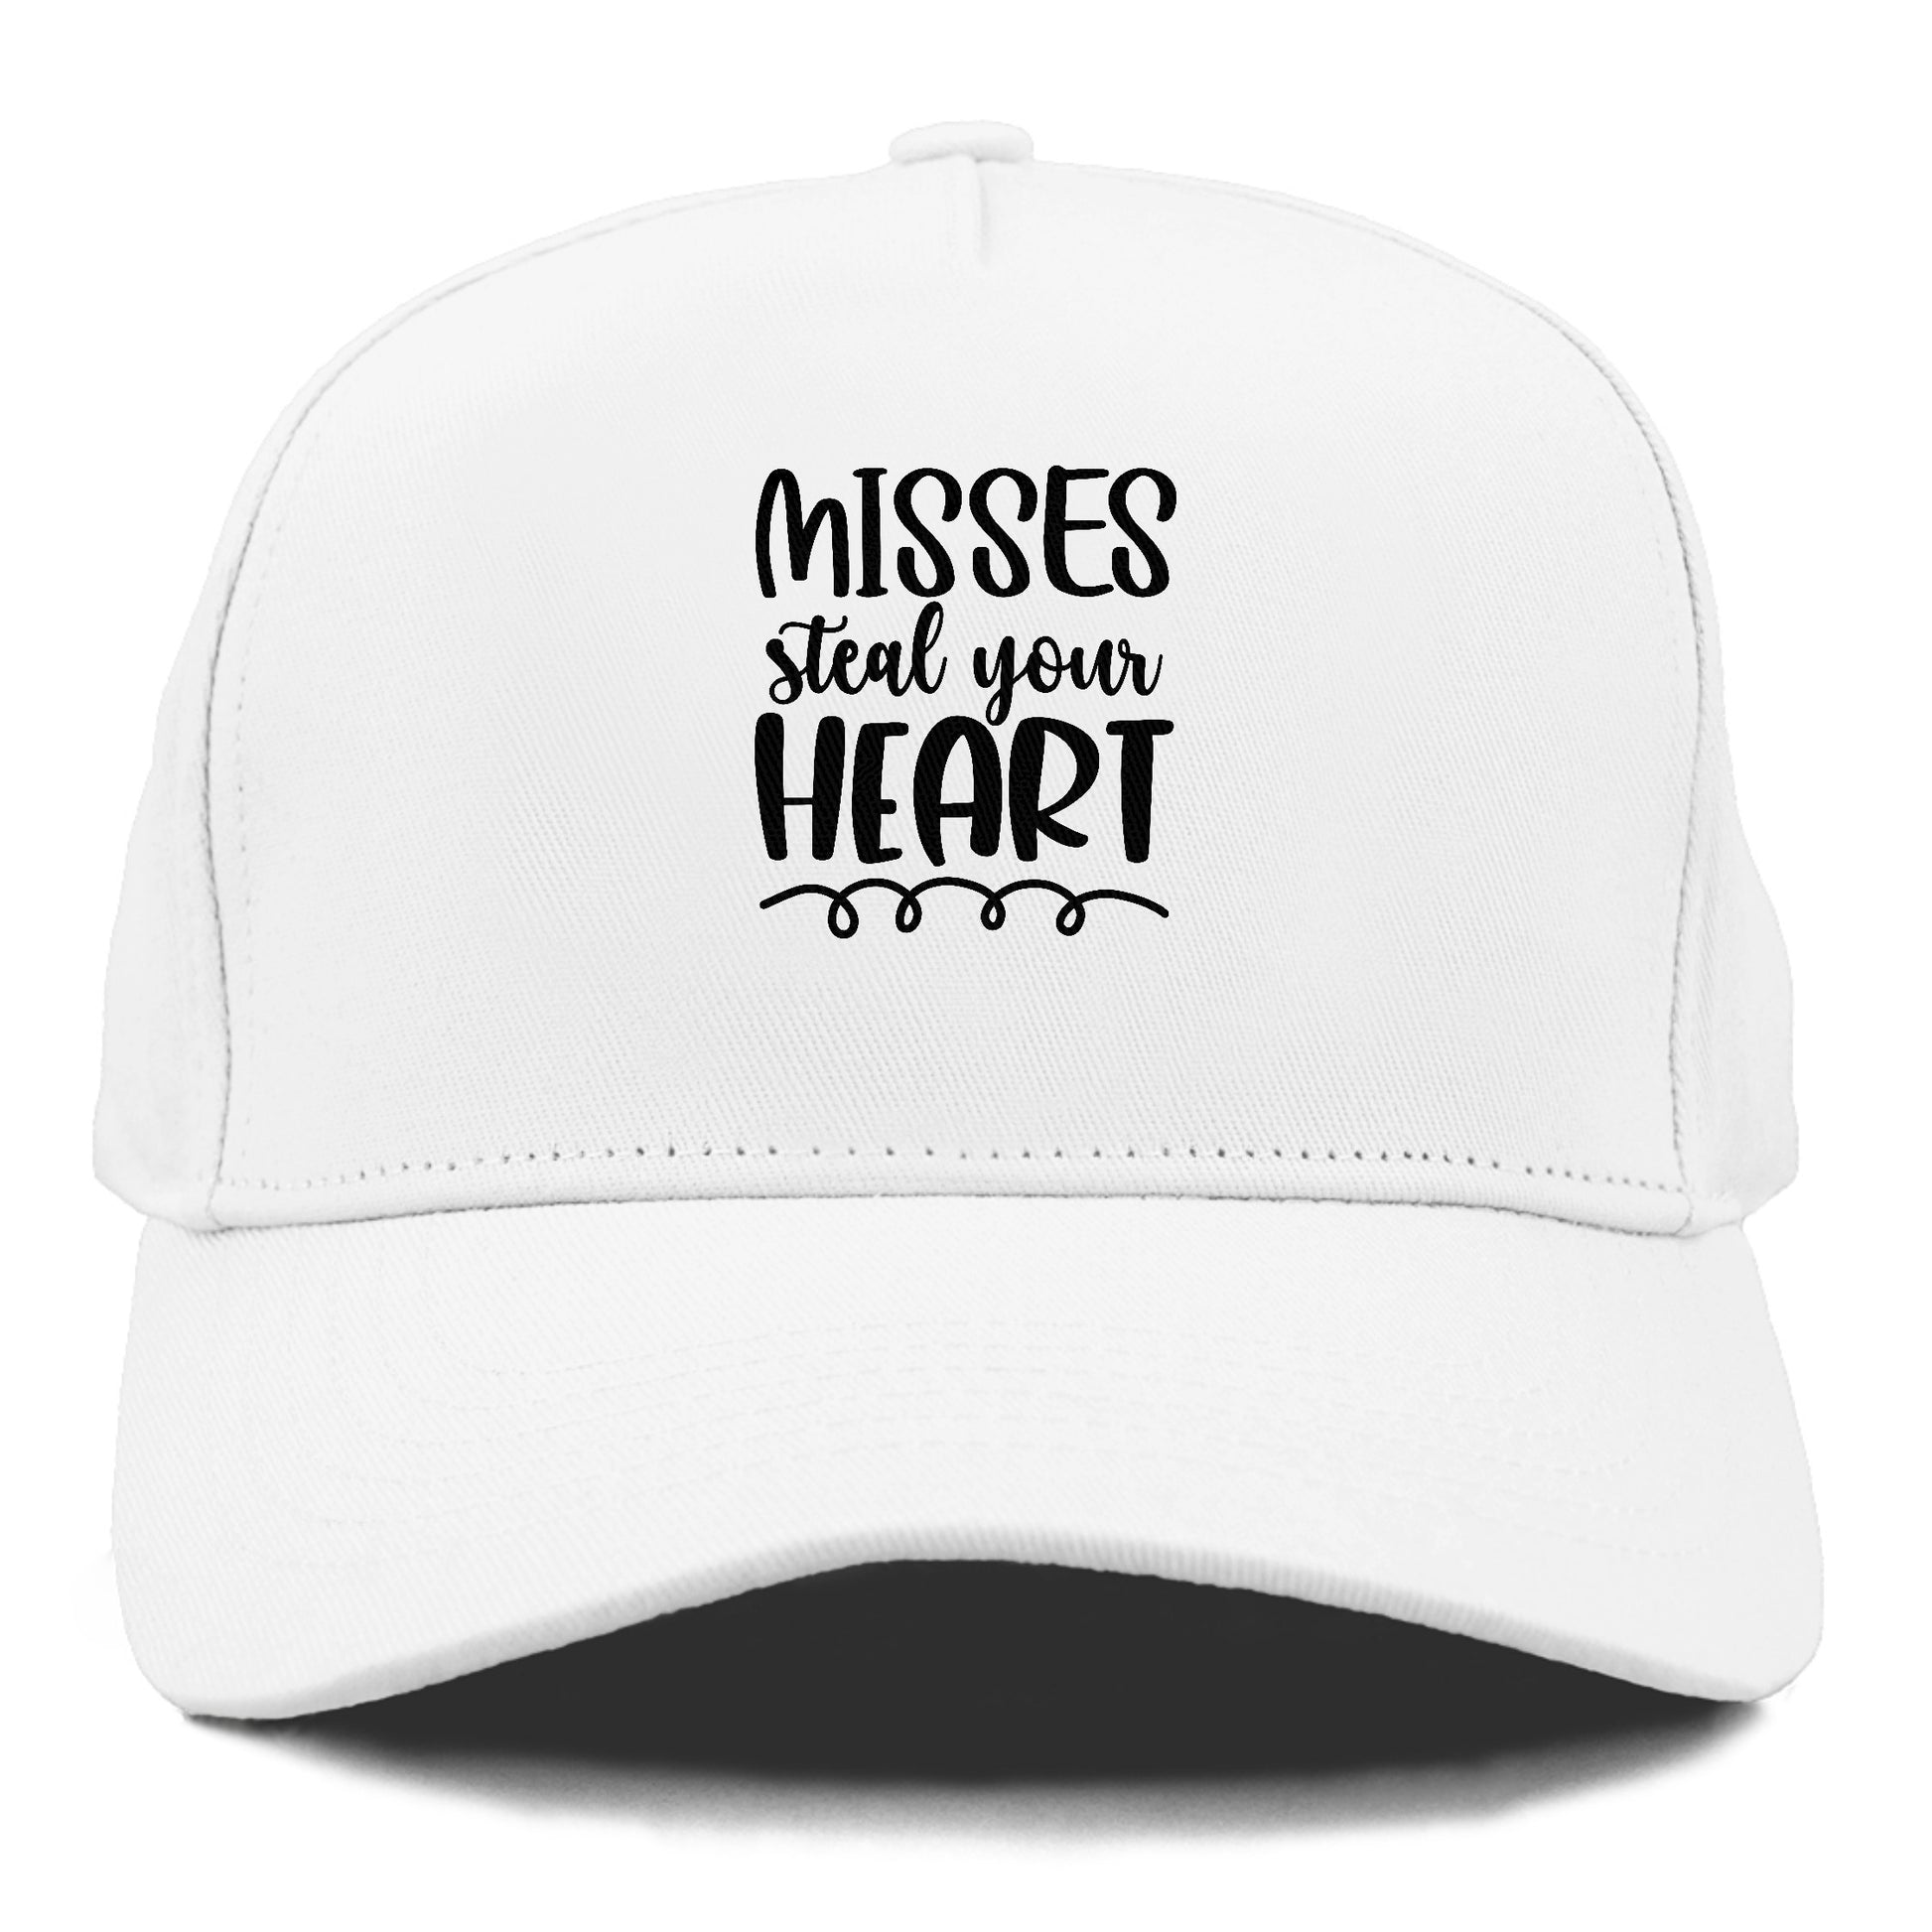 misses steal your heart Hat